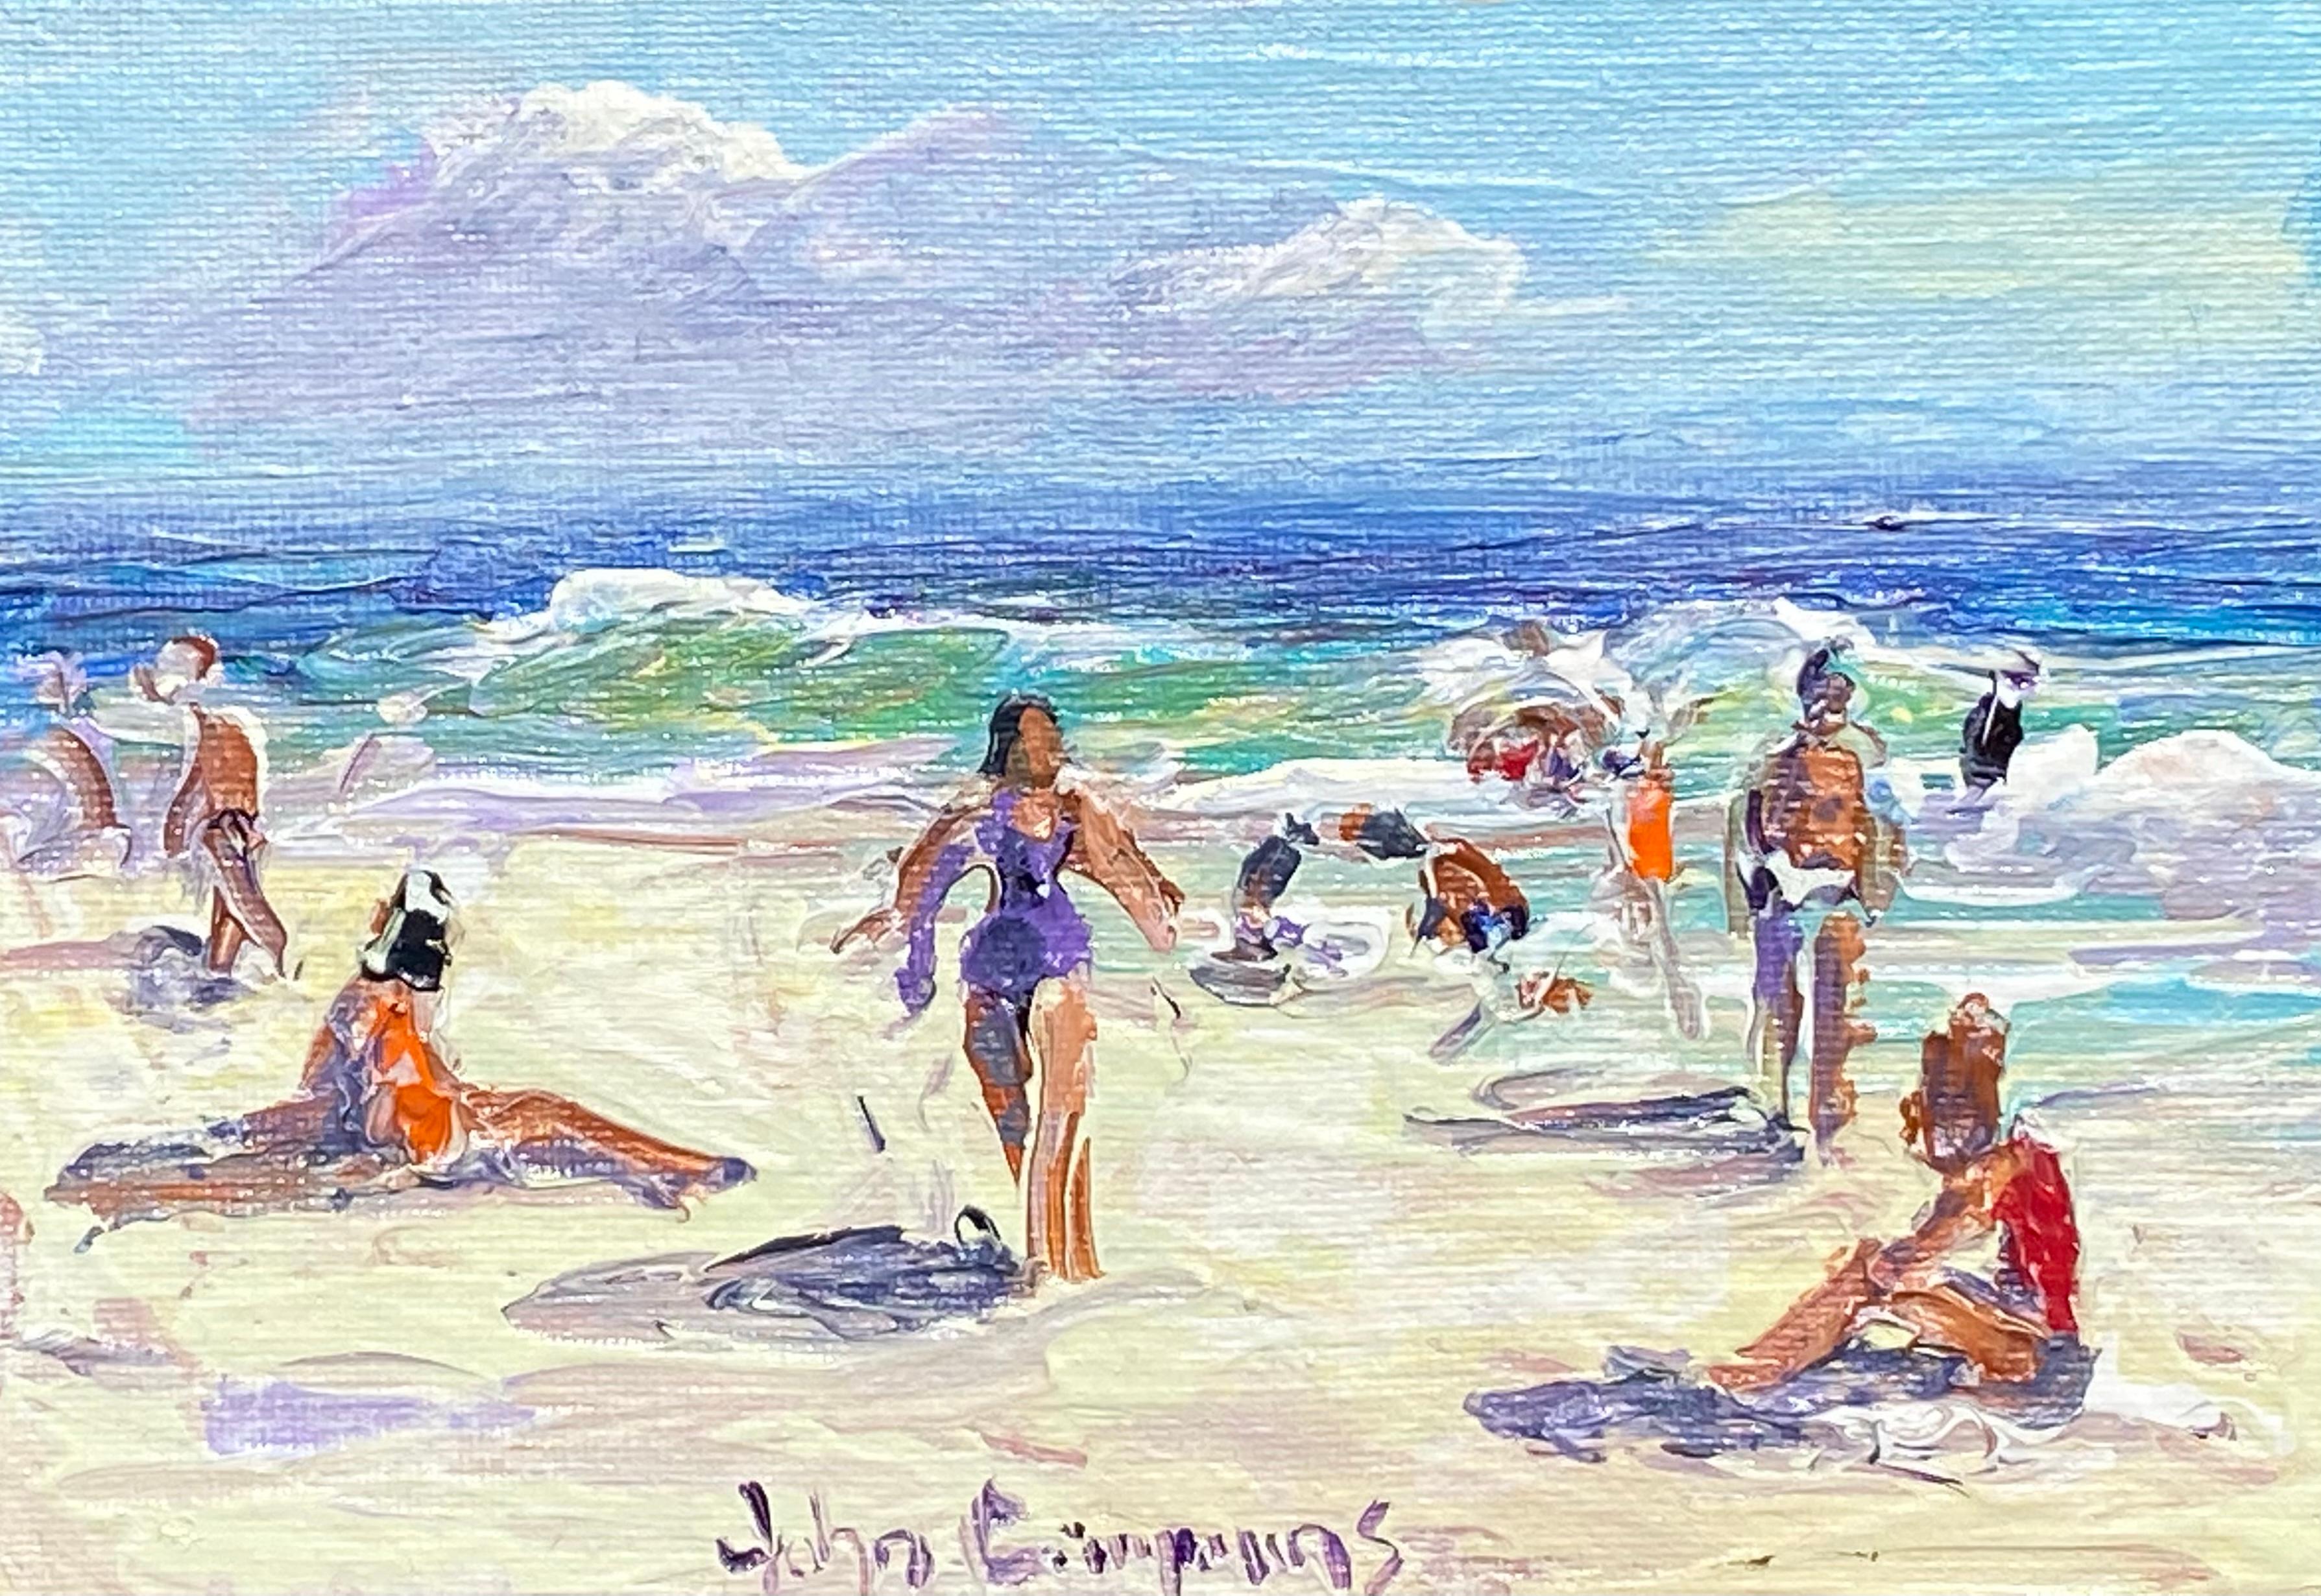 “ Perfect Beach Day” - Painting by John Crimmins